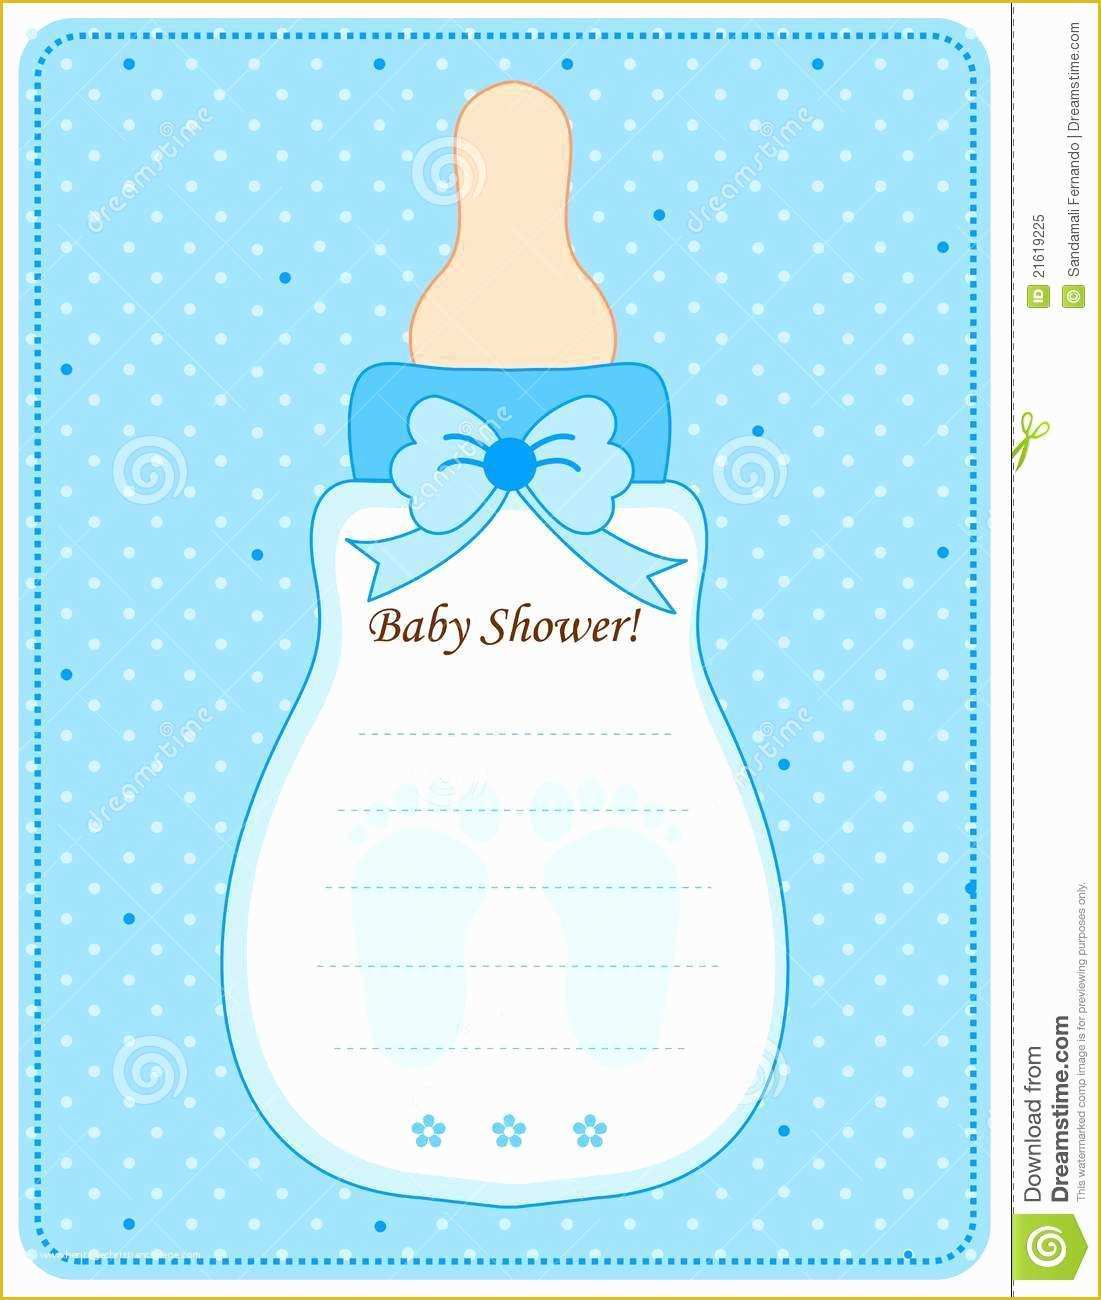 Free Printable Baby Shower Invitations Templates for Boys Of Baby Bottle Invitation Template